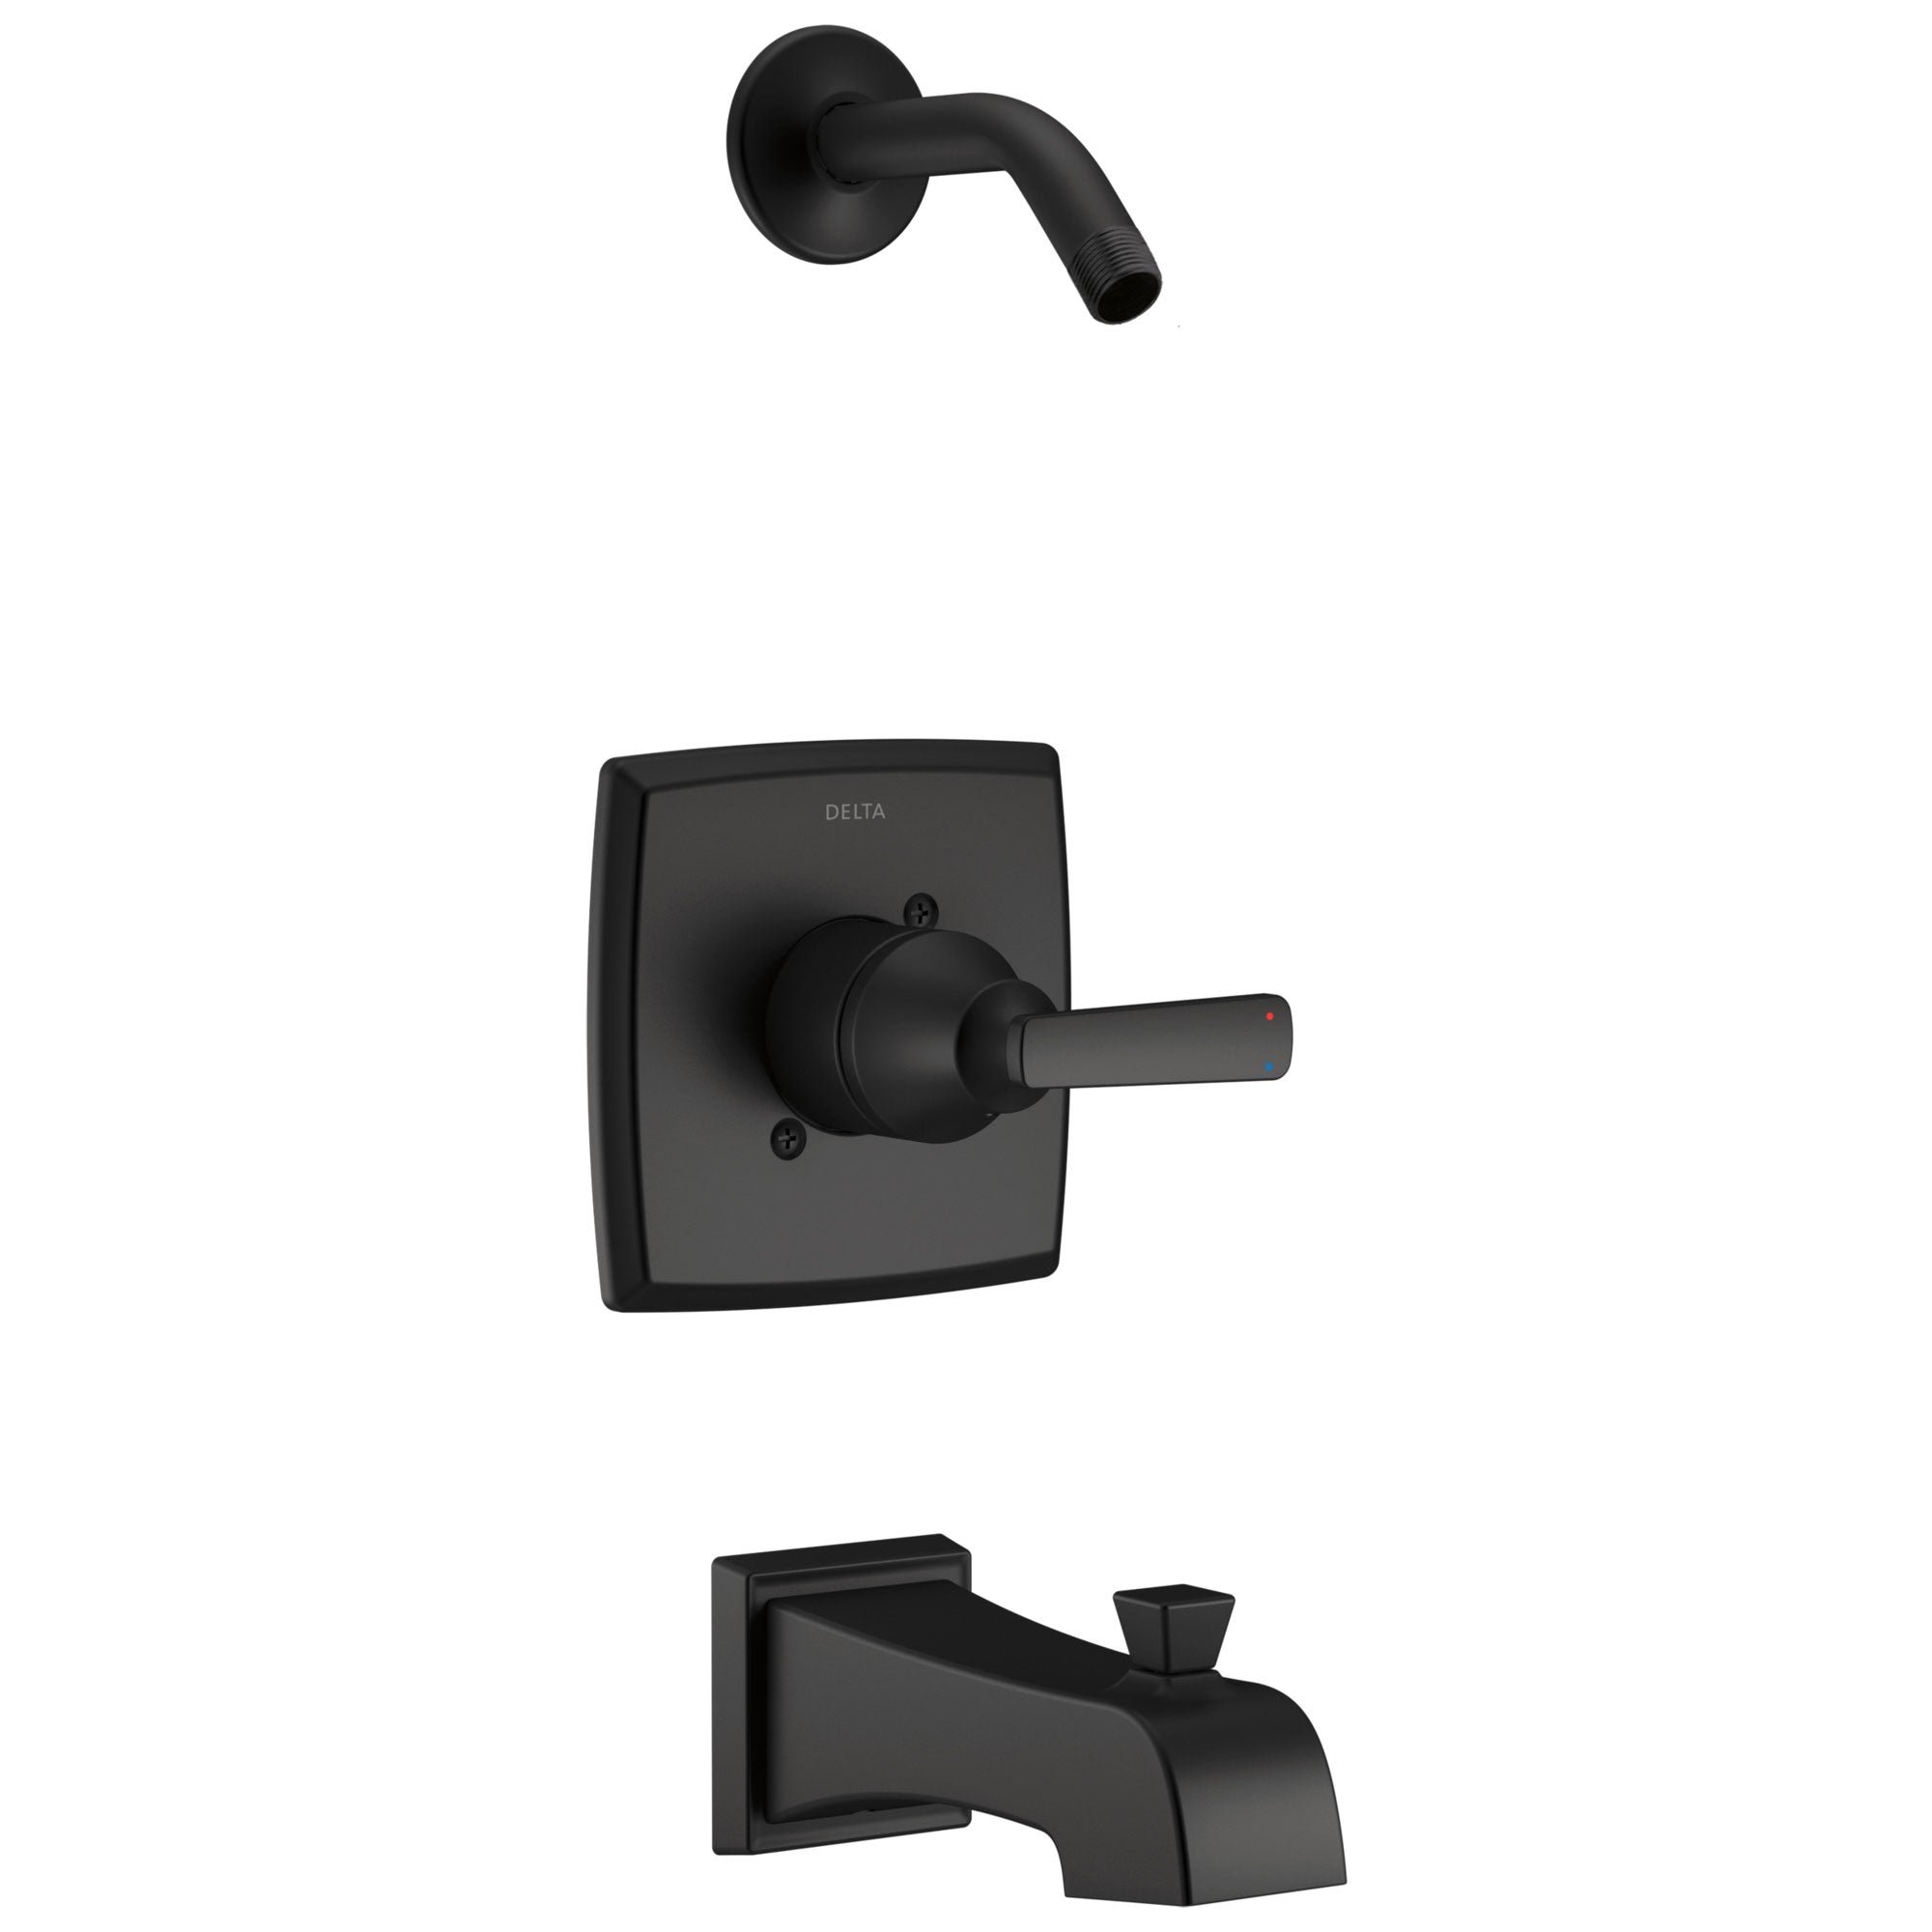 Delta Ashlyn Matte Black Finish Monitor 14 Series Tub and Shower Combination Faucet Trim Kit Less Showerhead (Requires Valve) DT14464BLLHD